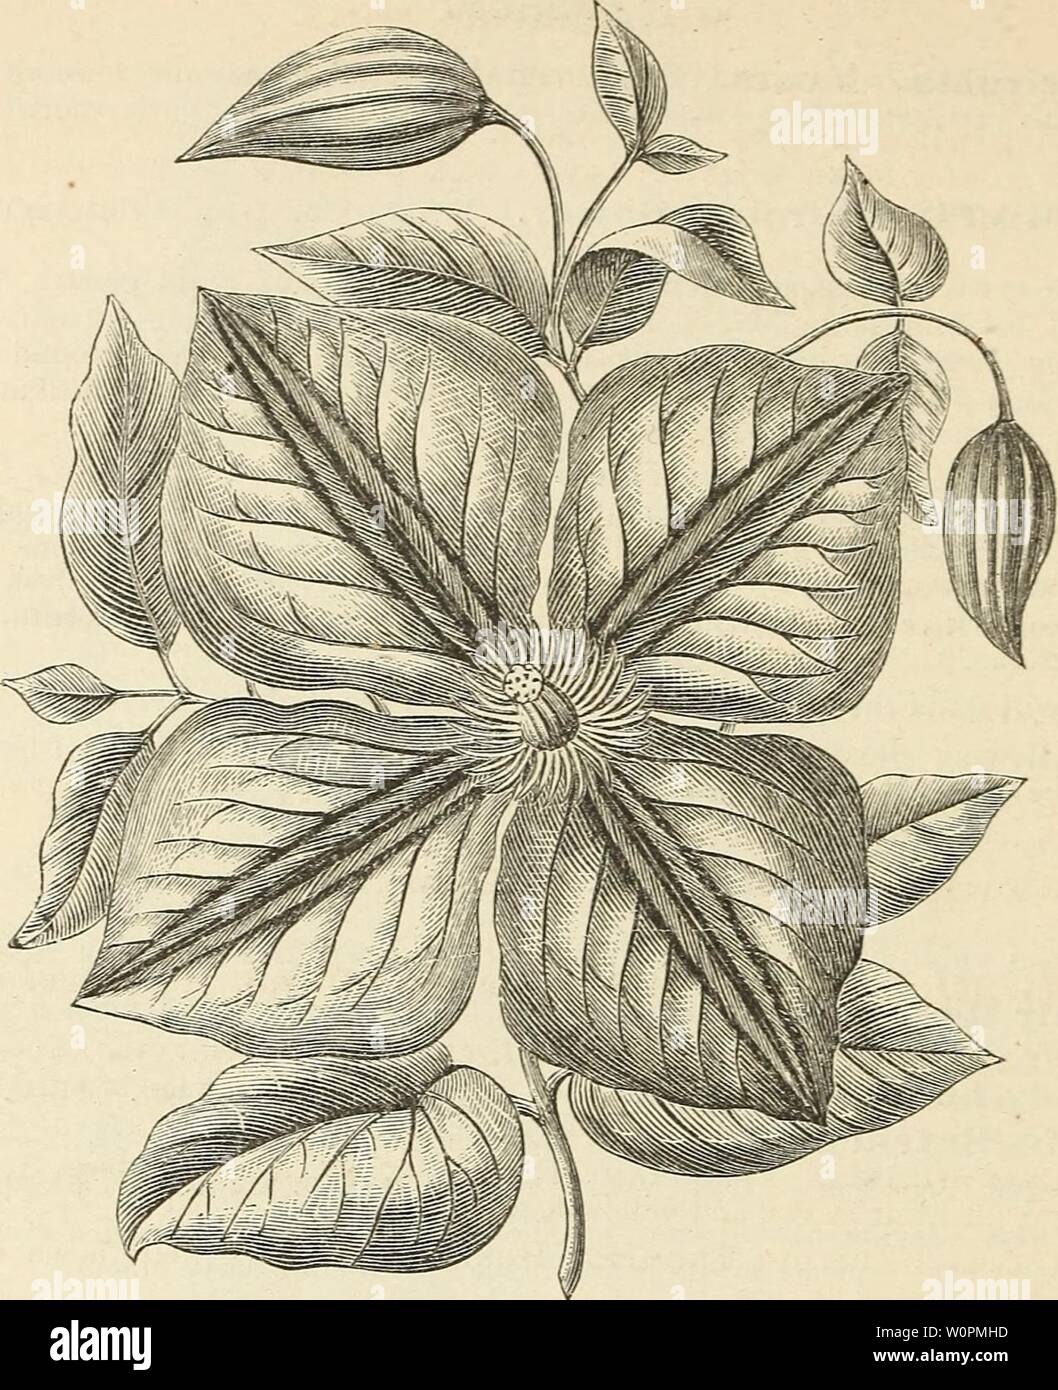 Archive image from page 87 of Descriptive catalogue of hardy ornamental. Descriptive catalogue of hardy ornamental trees, shrubs, herbaceous perennial plants, etc. : twenty-fourth edition descriptivecatal1880ellw Year: 1880  80 ELLWANGER & BARRY'S CATALOGUE.    FLOWER OF CLEMATIS JACKMAKNI. {y, Xatubal Size ) C. viticella moclesta (Modeste Ghierin). Large bright blue; free growing and free flowering. One of the best. 81,00. C. viticella rubra grandifiora (Jackman). Bright claret red ; fine! 81.00.. C. viticella veiiosa. Reddish purple; veined; one of the finest. $1.25. Section 5. Jaekmaimi Typ Stock Photo